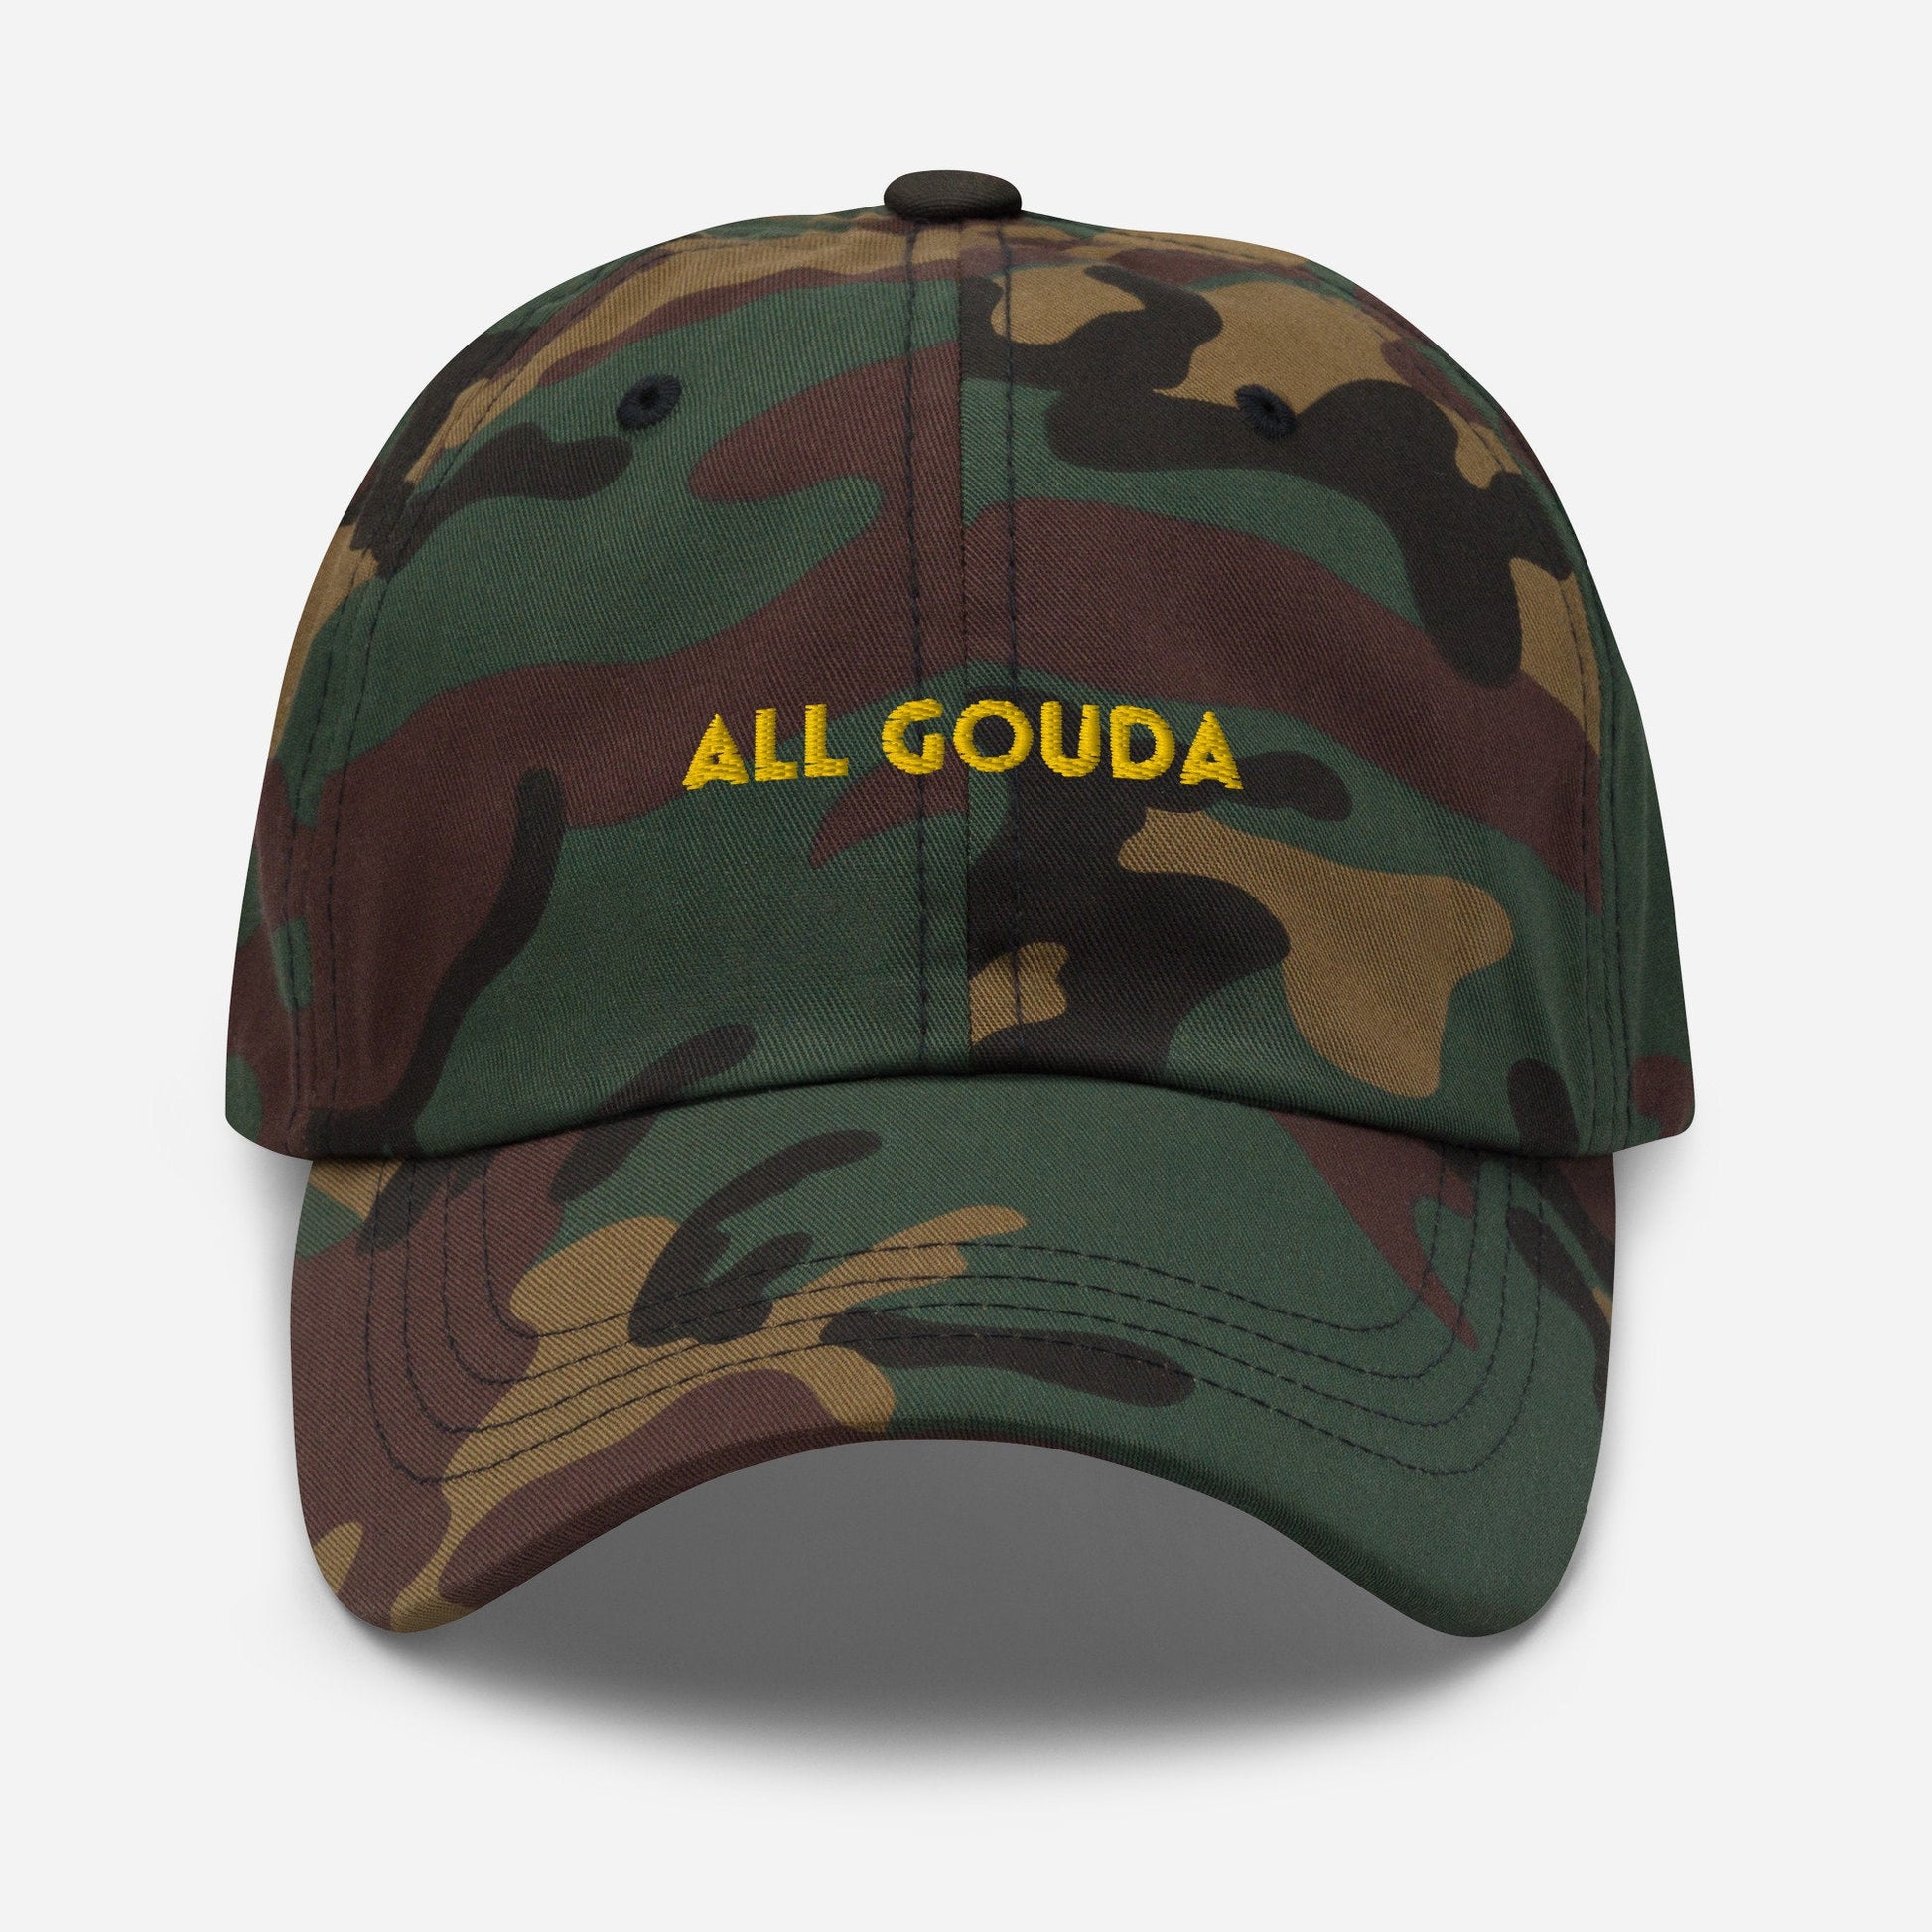 All Gouda - Gift for Cheese lovers, Home Cooks & Chefs - Embroidered Cotton Cap - Evilwater Originals